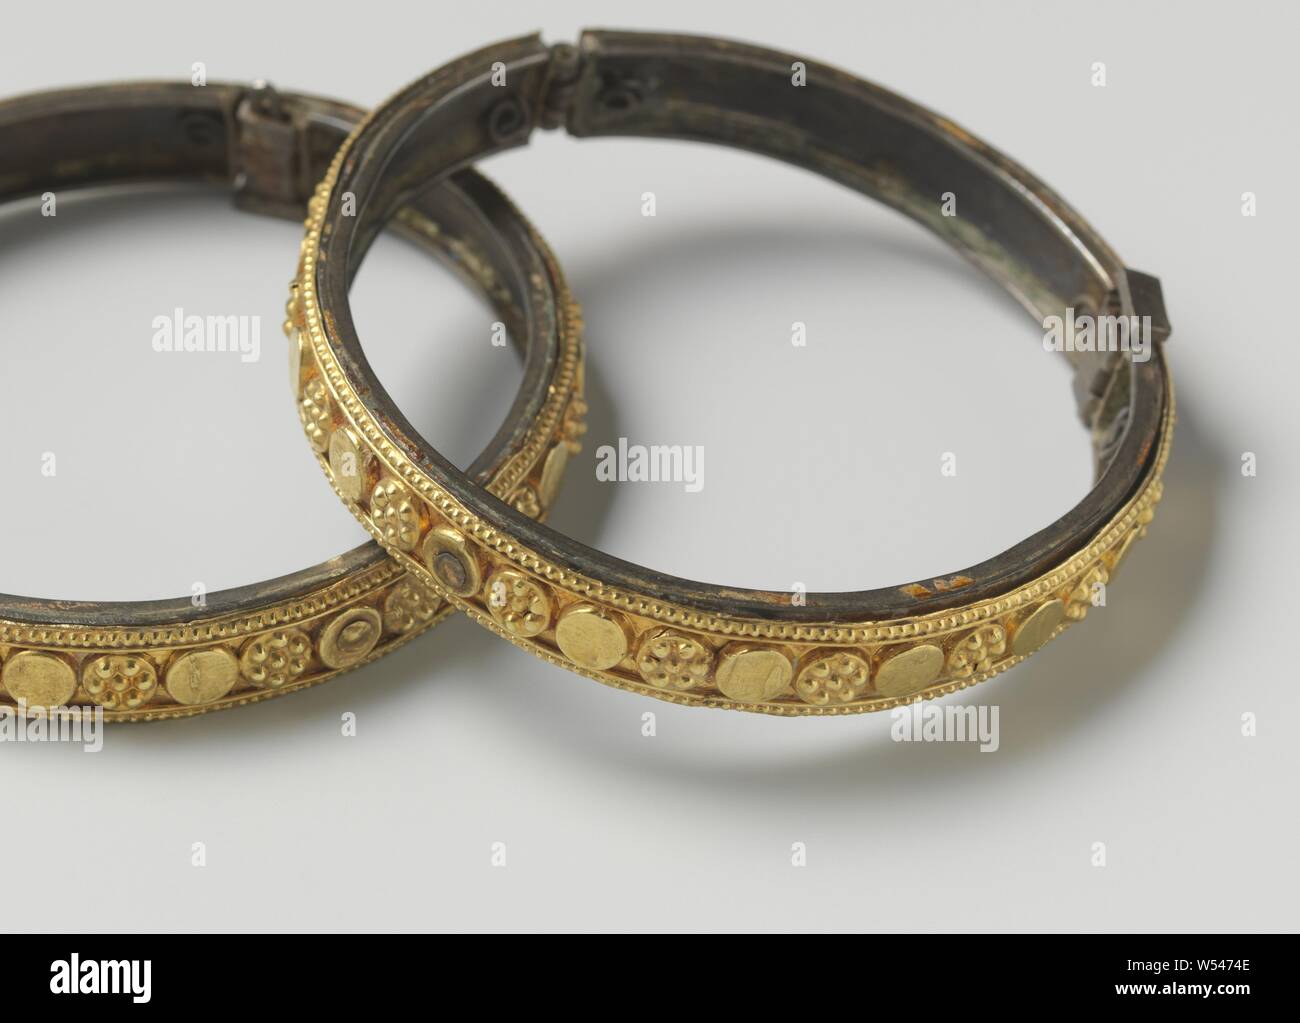 Pair of bracelets (chandan churi), Bracelet with a bronze inner ring with hinge and clasp, on which is attached a gold ring, decorated with turned-out circular ornaments and pearl borders., anonymous, Surat, c. 1750, gold (metal), bronze (metal), striking (metalworking), d 7.0 cm × h 0.9 cm Stock Photo